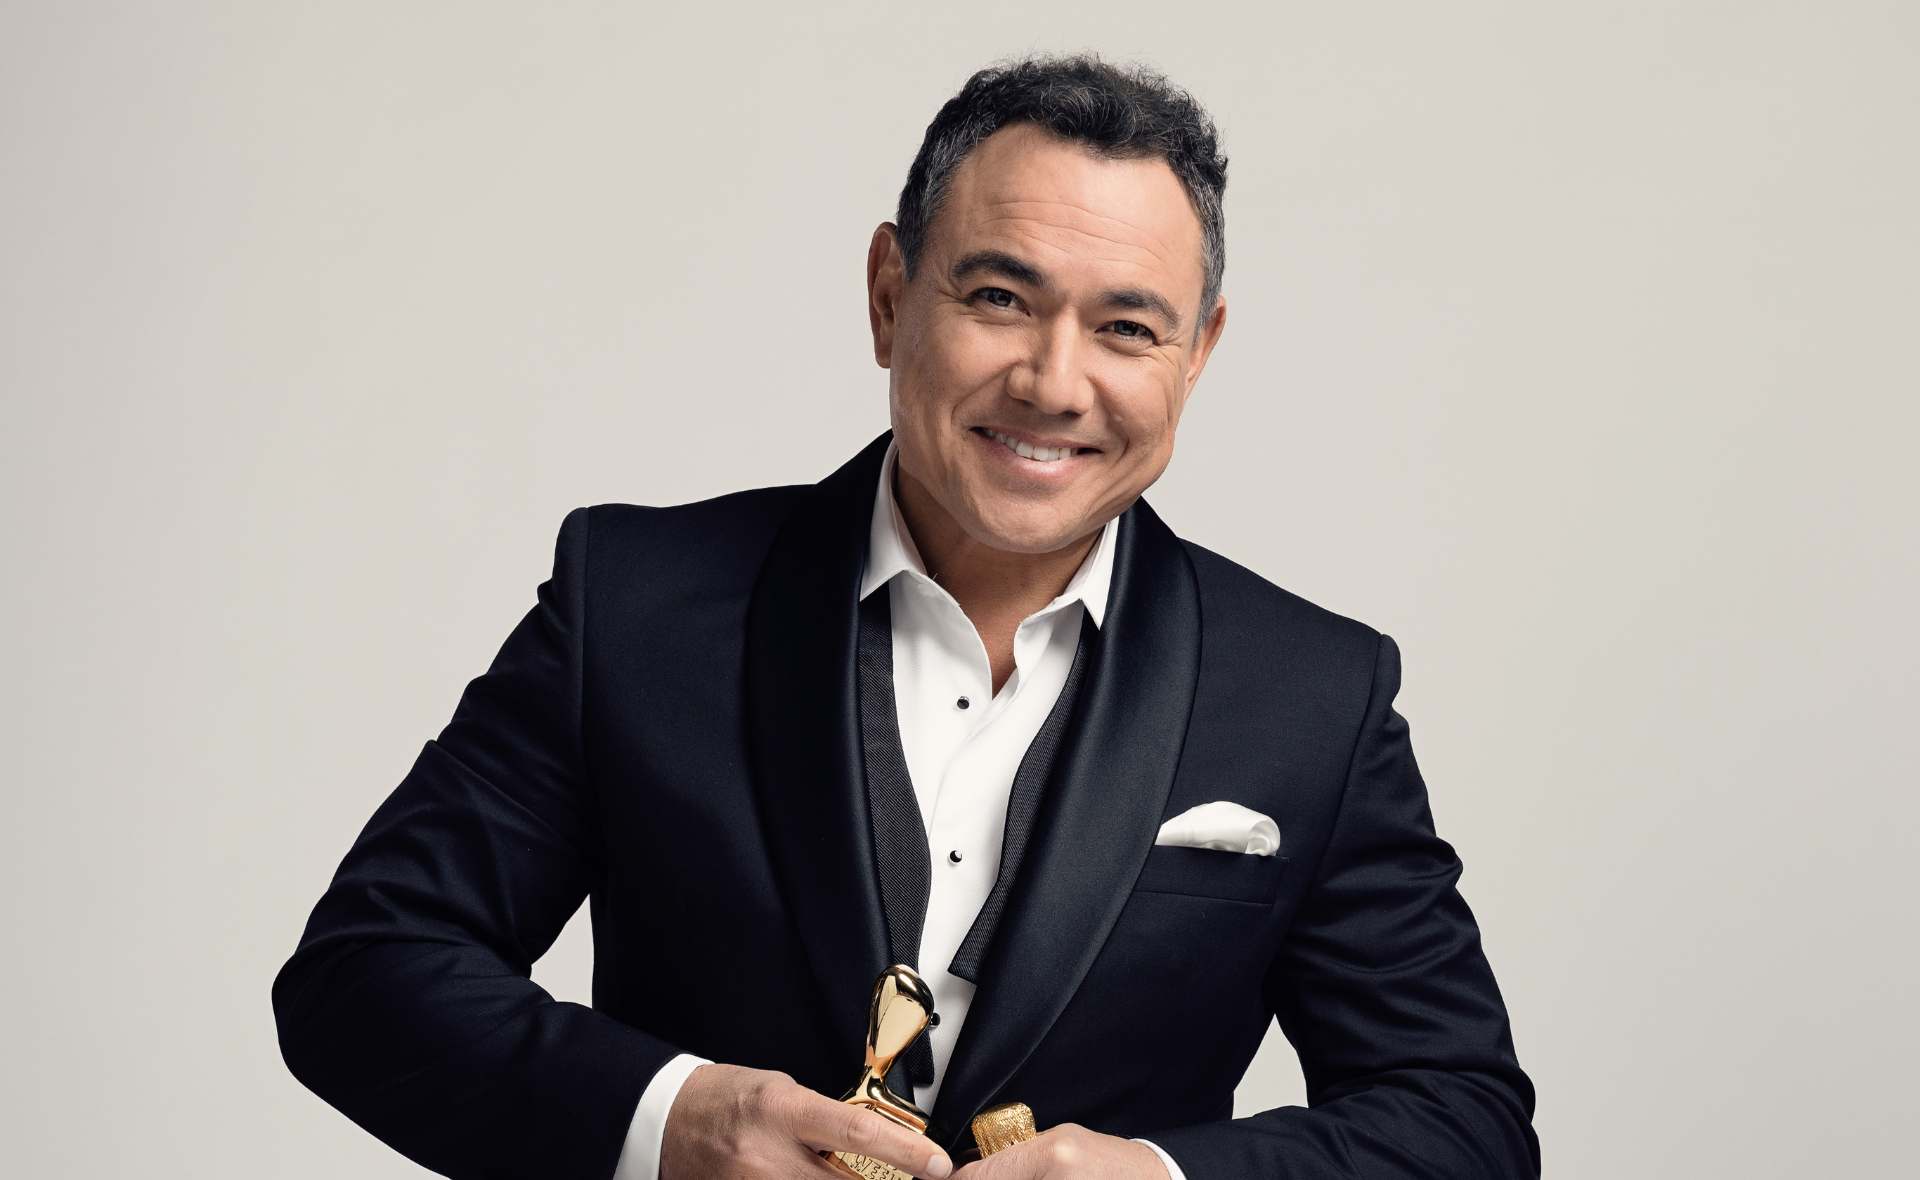 Sam Pang takes aim as the host of the 63rd TV WEEK Logie Awards